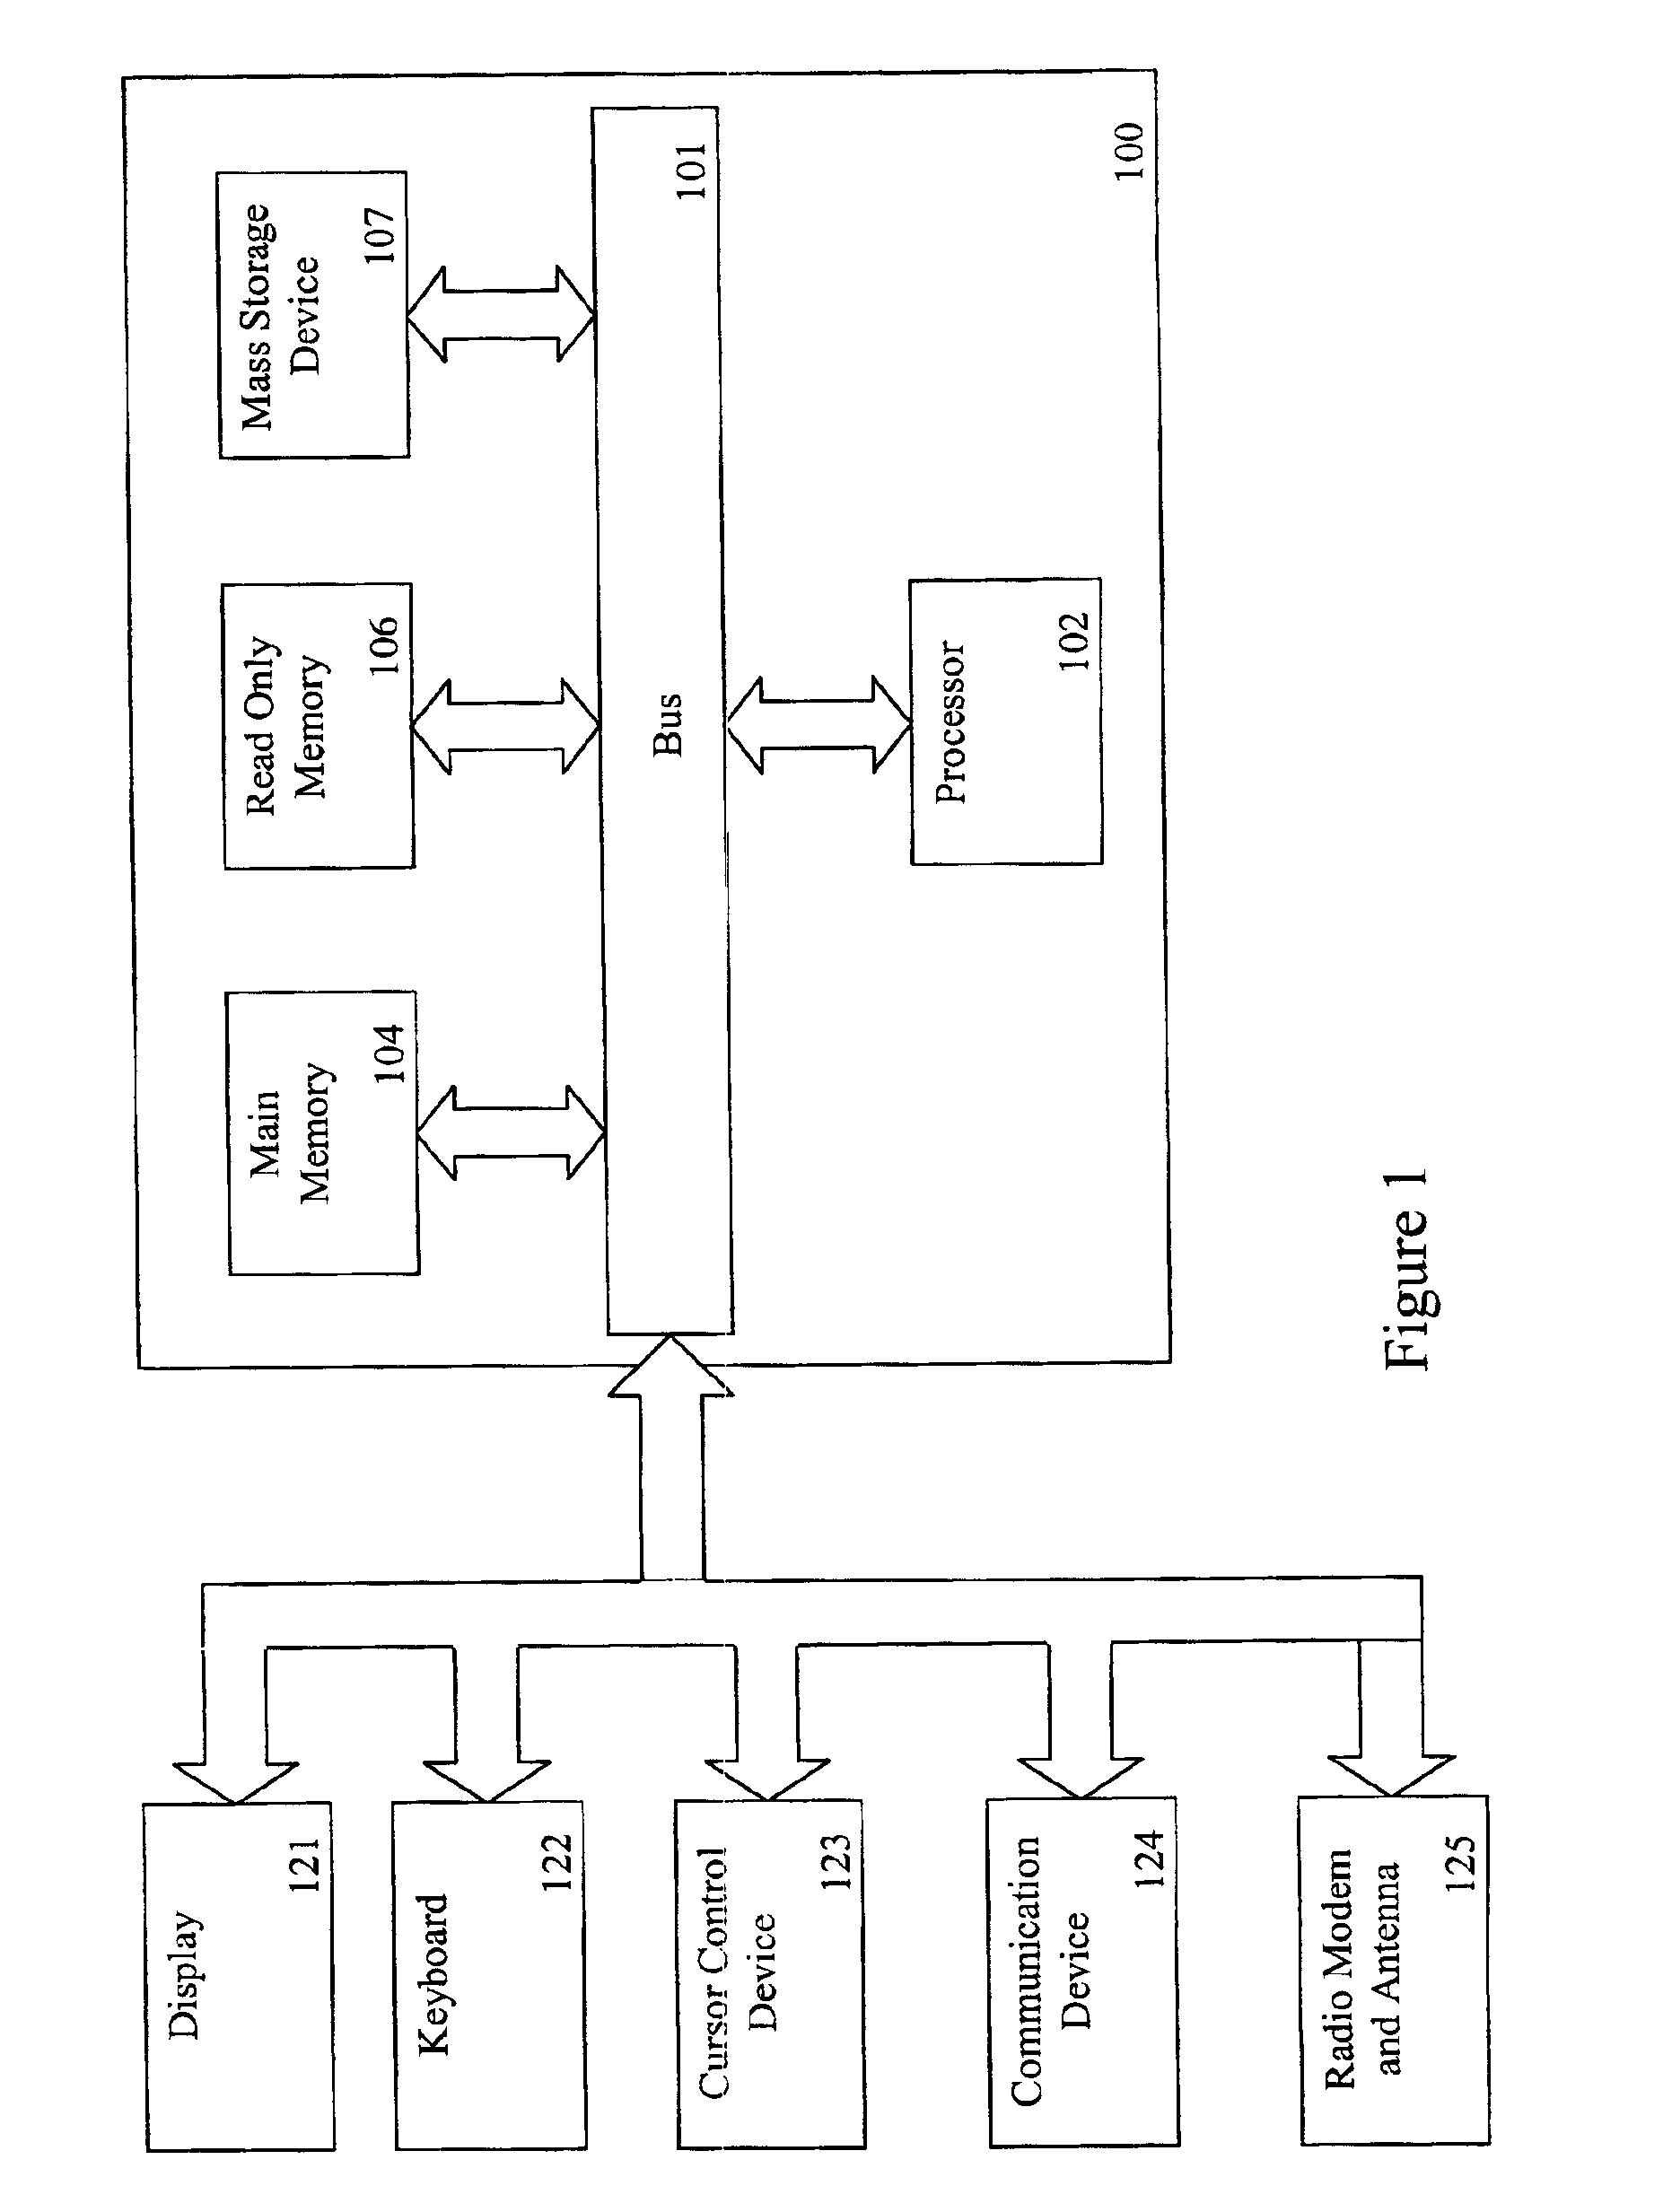 Method and apparatus for adaptive synchronization of network devices